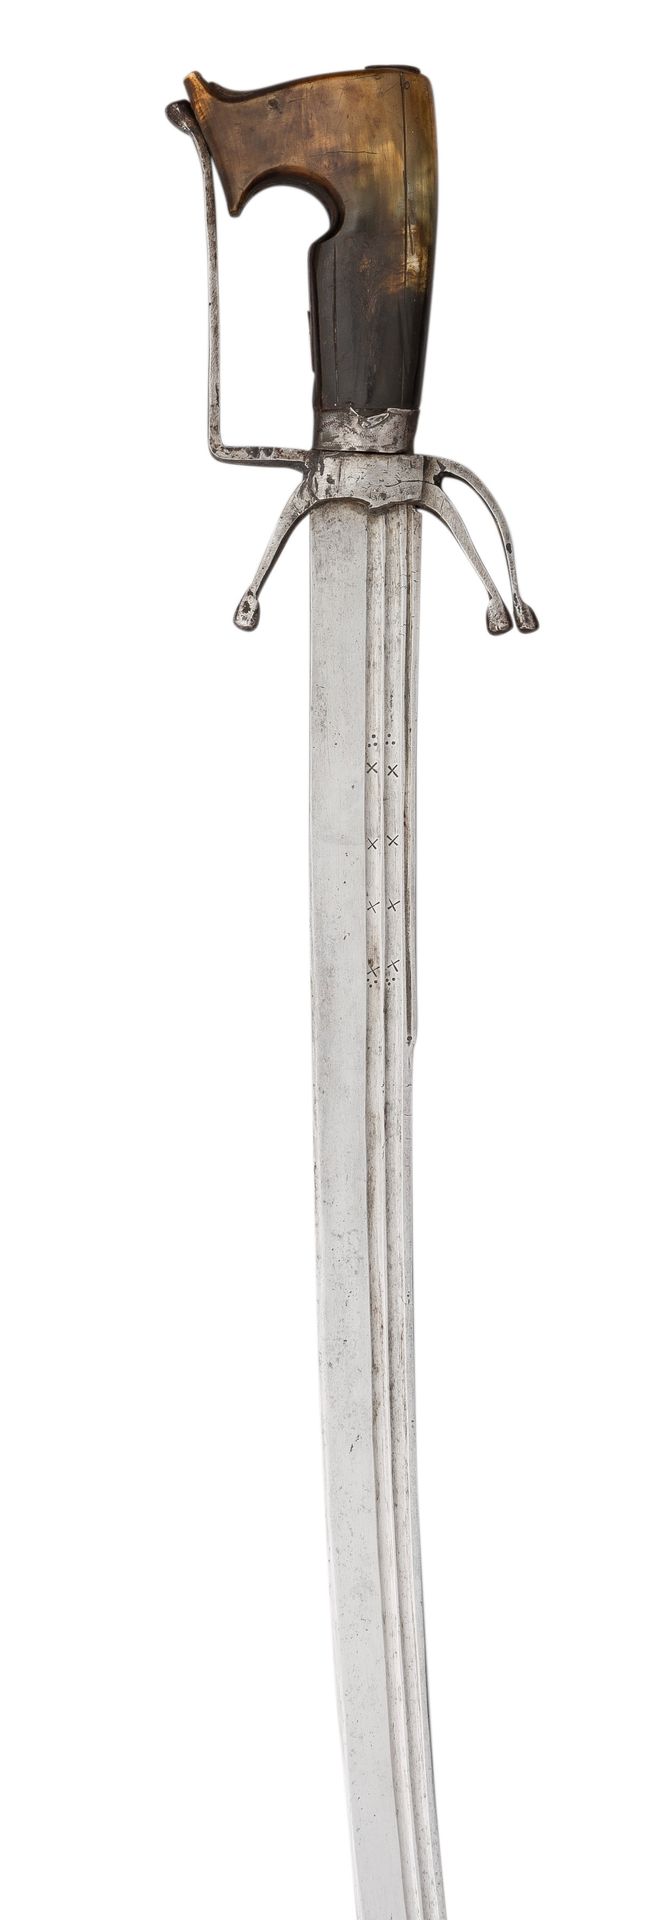 A NORTH AFRICAN SWORD (NIMCHA), MOROCCO, EARLY 19TH CENTURY A NORTH AFRICAN SWOR&hellip;